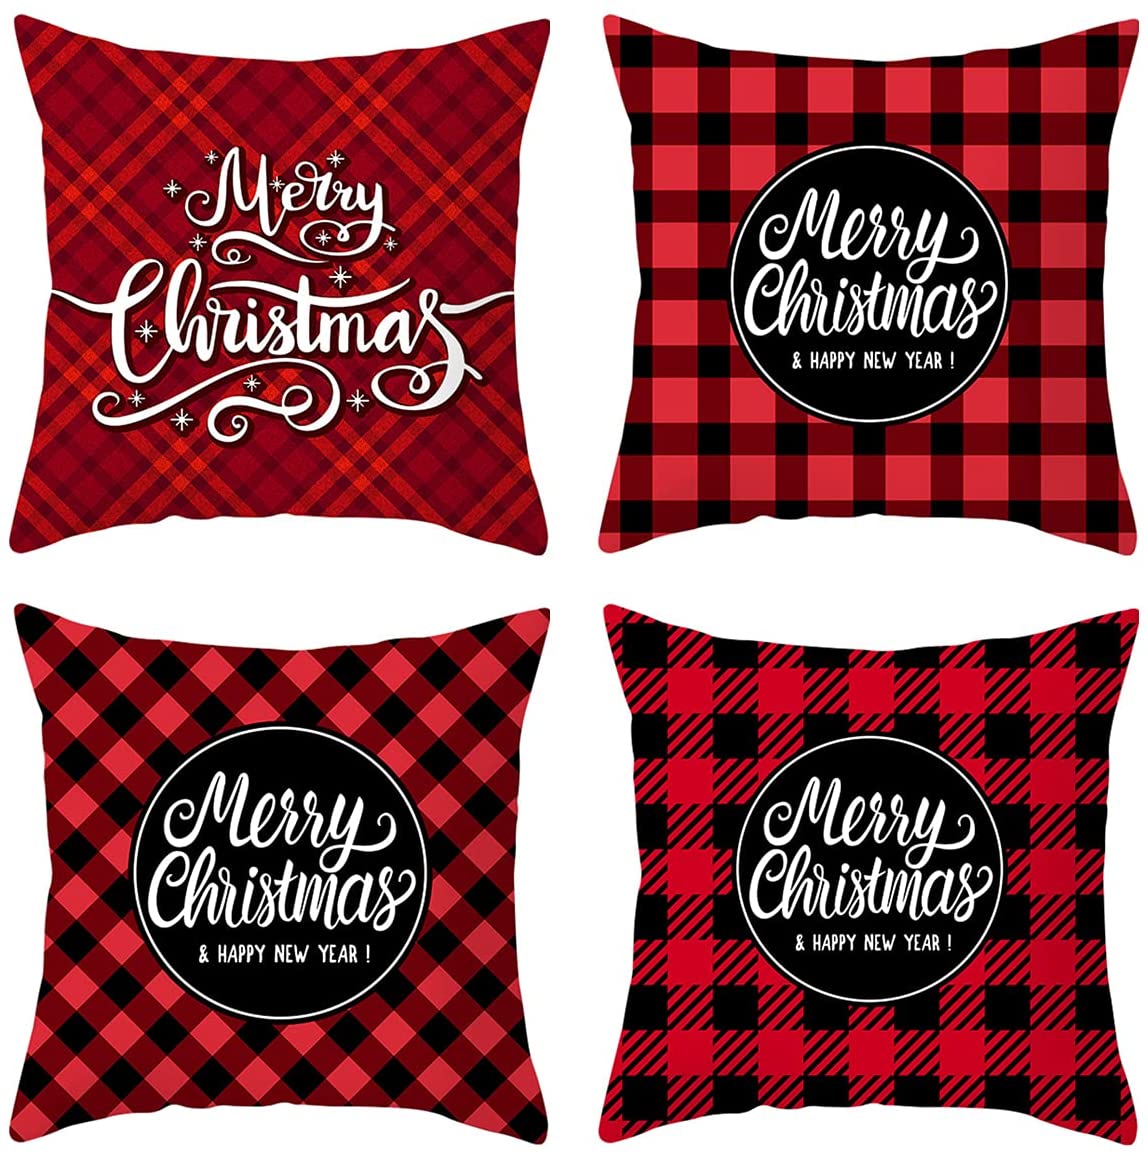 Holiday Decorations Pillow Covers Set of 4 for Sofa Couch Bed